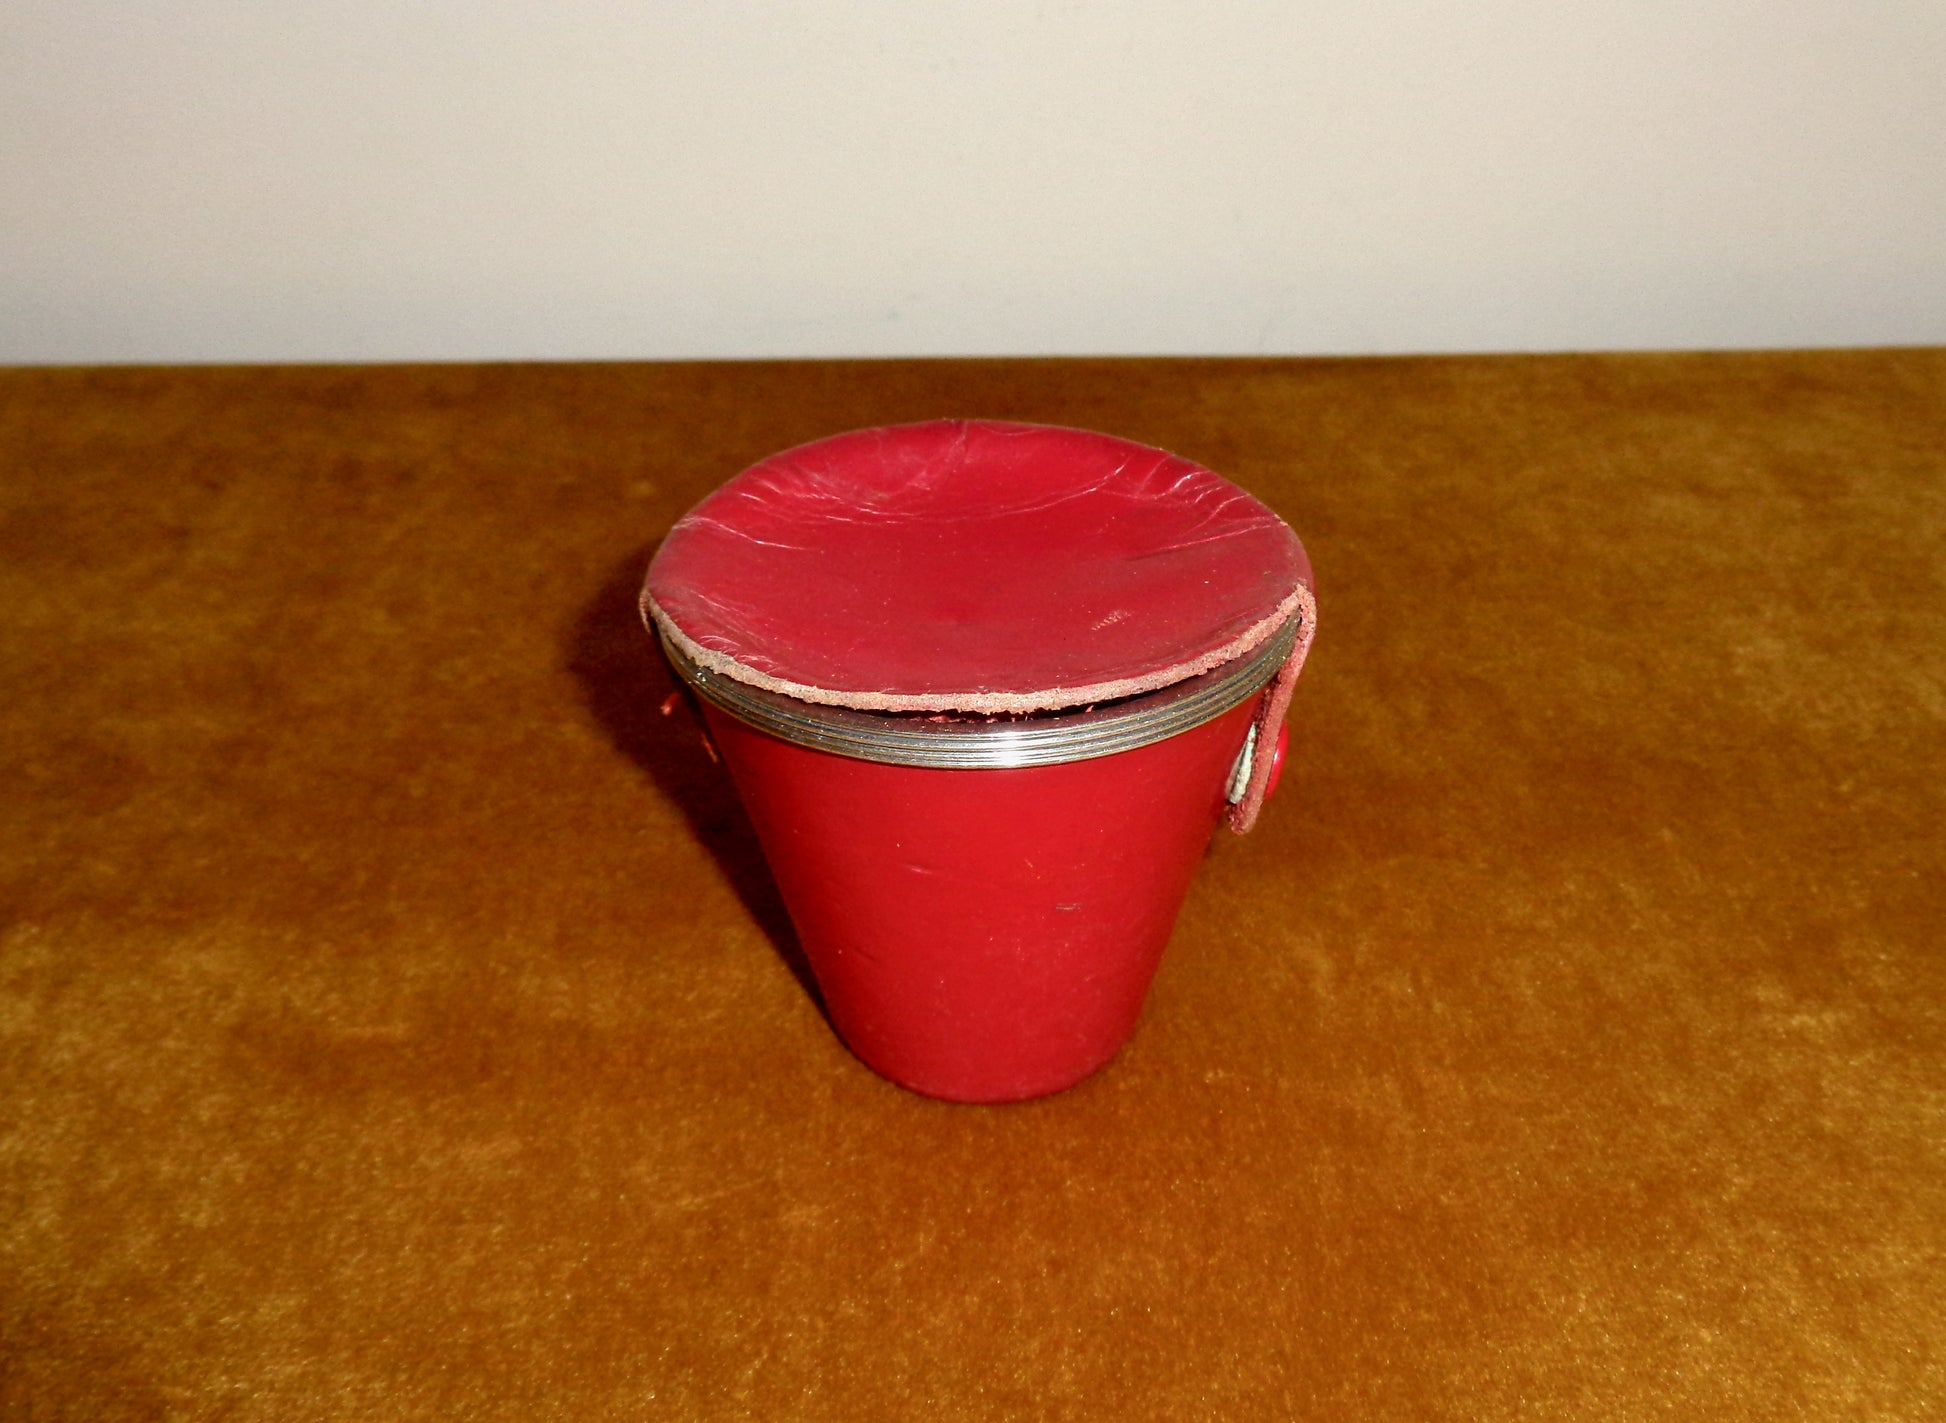 Set Of Four Stainless Stacking Stirrup Cups In A Red Leather Case By Ria Of Denmark